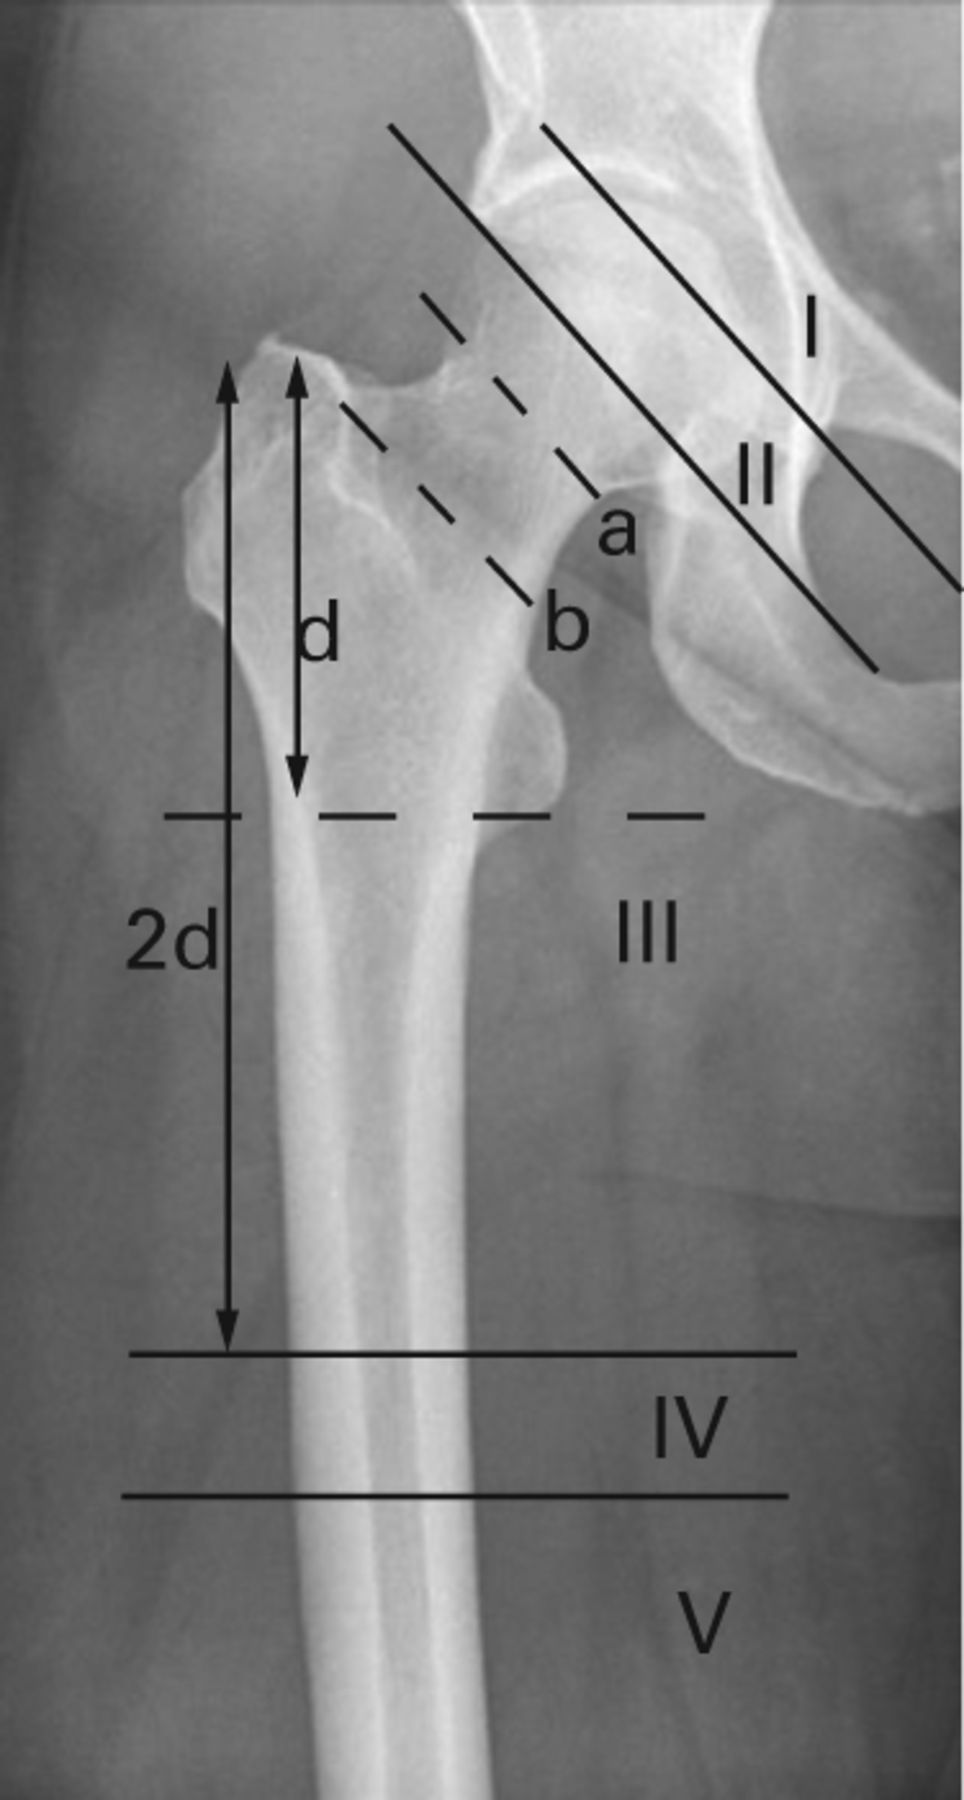 Fig. 1 
          Radiograph showing the classification
of stem length of the into types I–V (a: subcapital osteotomy level;
b: standard osteotomy level; d: distance between tip of greater
trochanter and base of lesser trochanter).
        